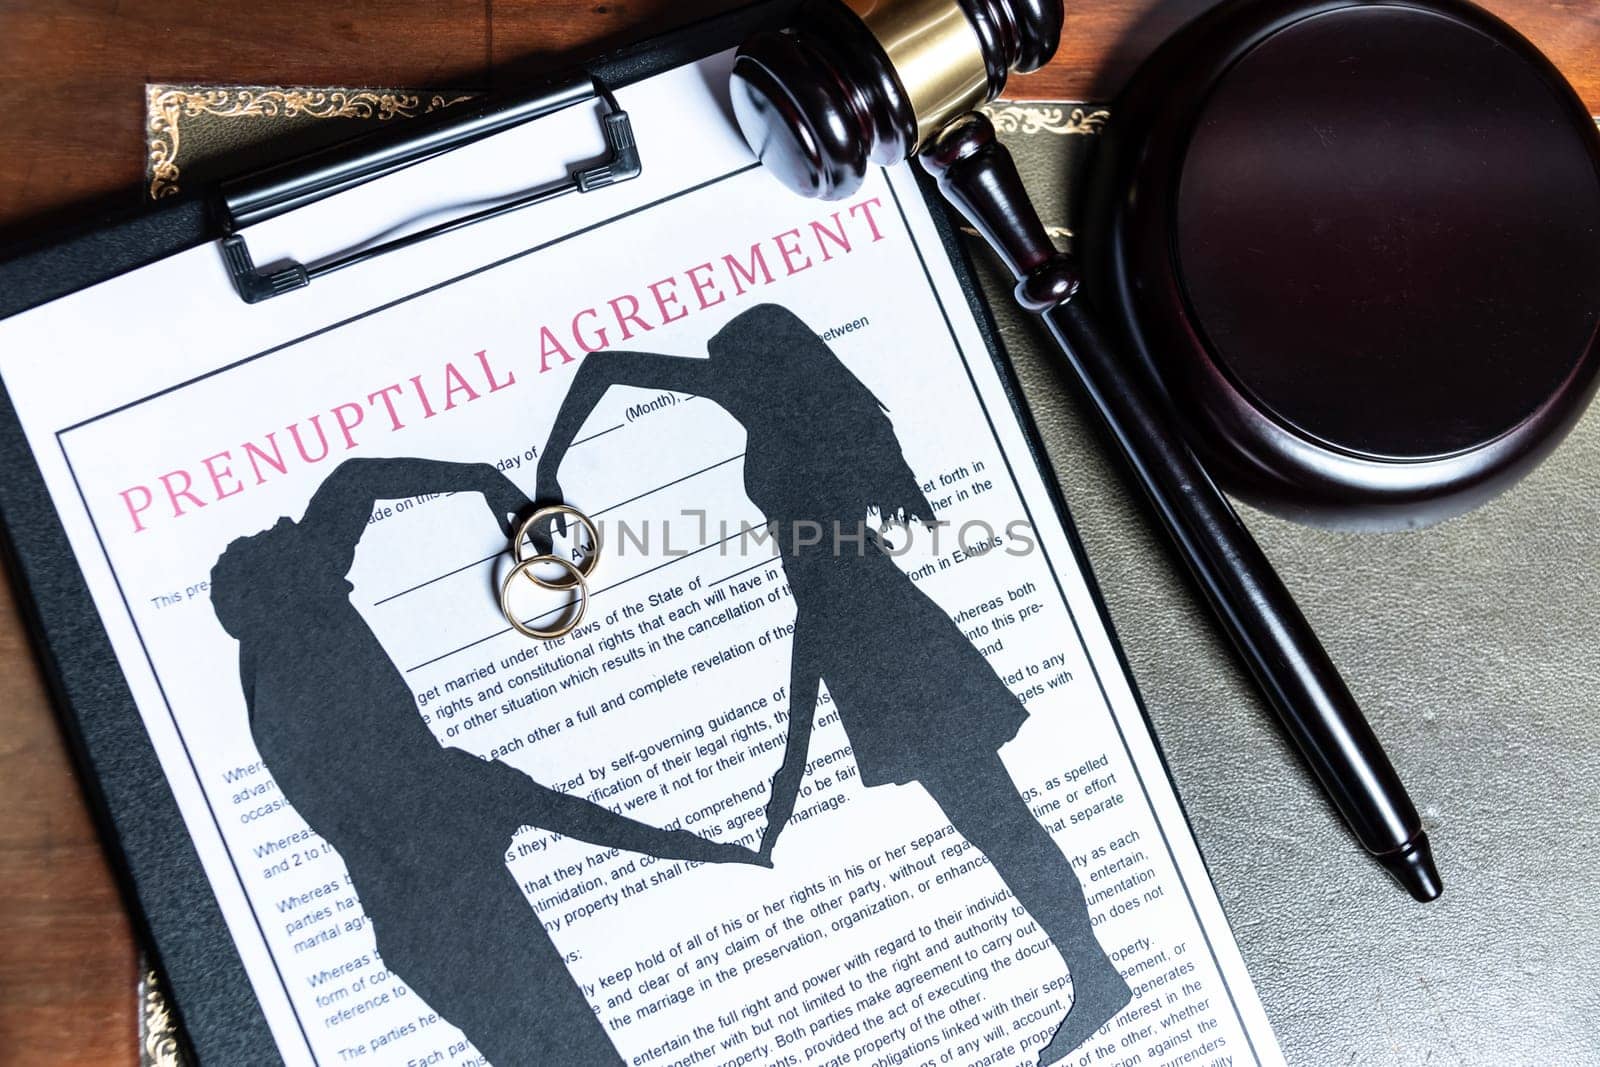 A clipboard holding a prenuptial agreement with a cut-out silhouette of a couple and wedding rings, next to a judge's gavel. by jbruiz78